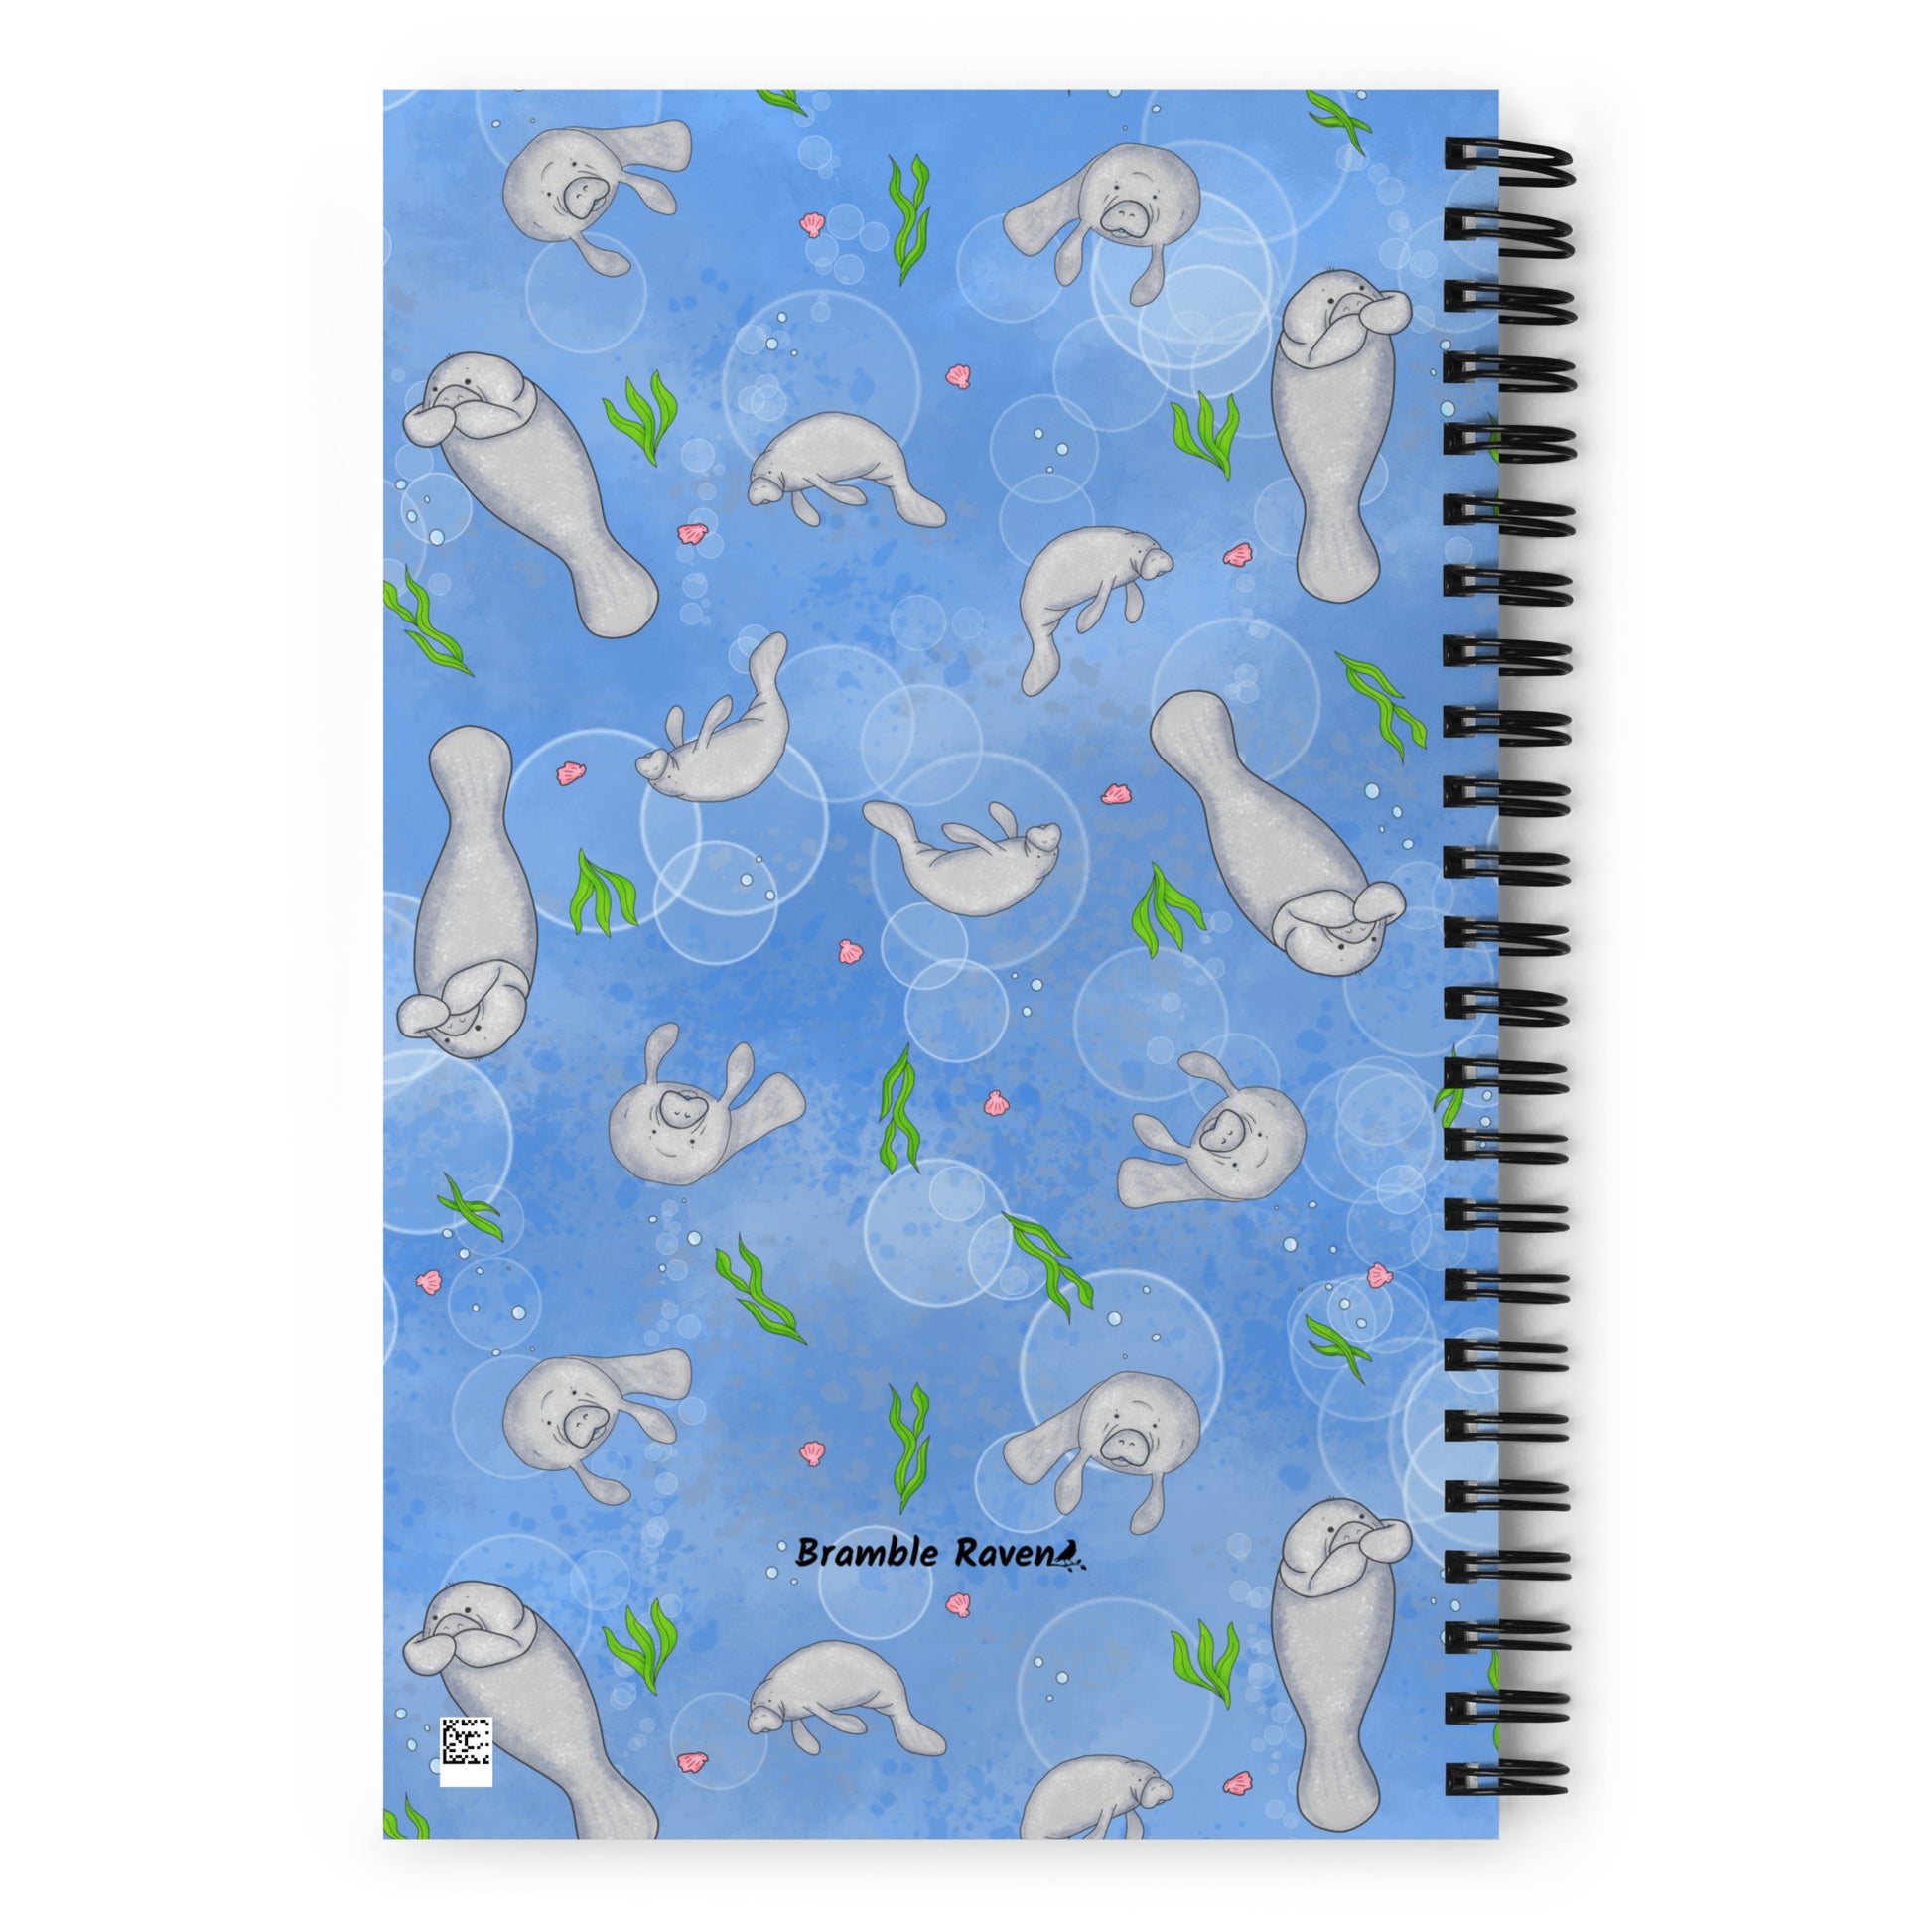 Spiral bound notebook with soft touch cover and 140 dotted pages. Cover features cute illustrated manatees swimming in the water. Measures 5.5 inches by 8.5 inches. Back view of notebook.